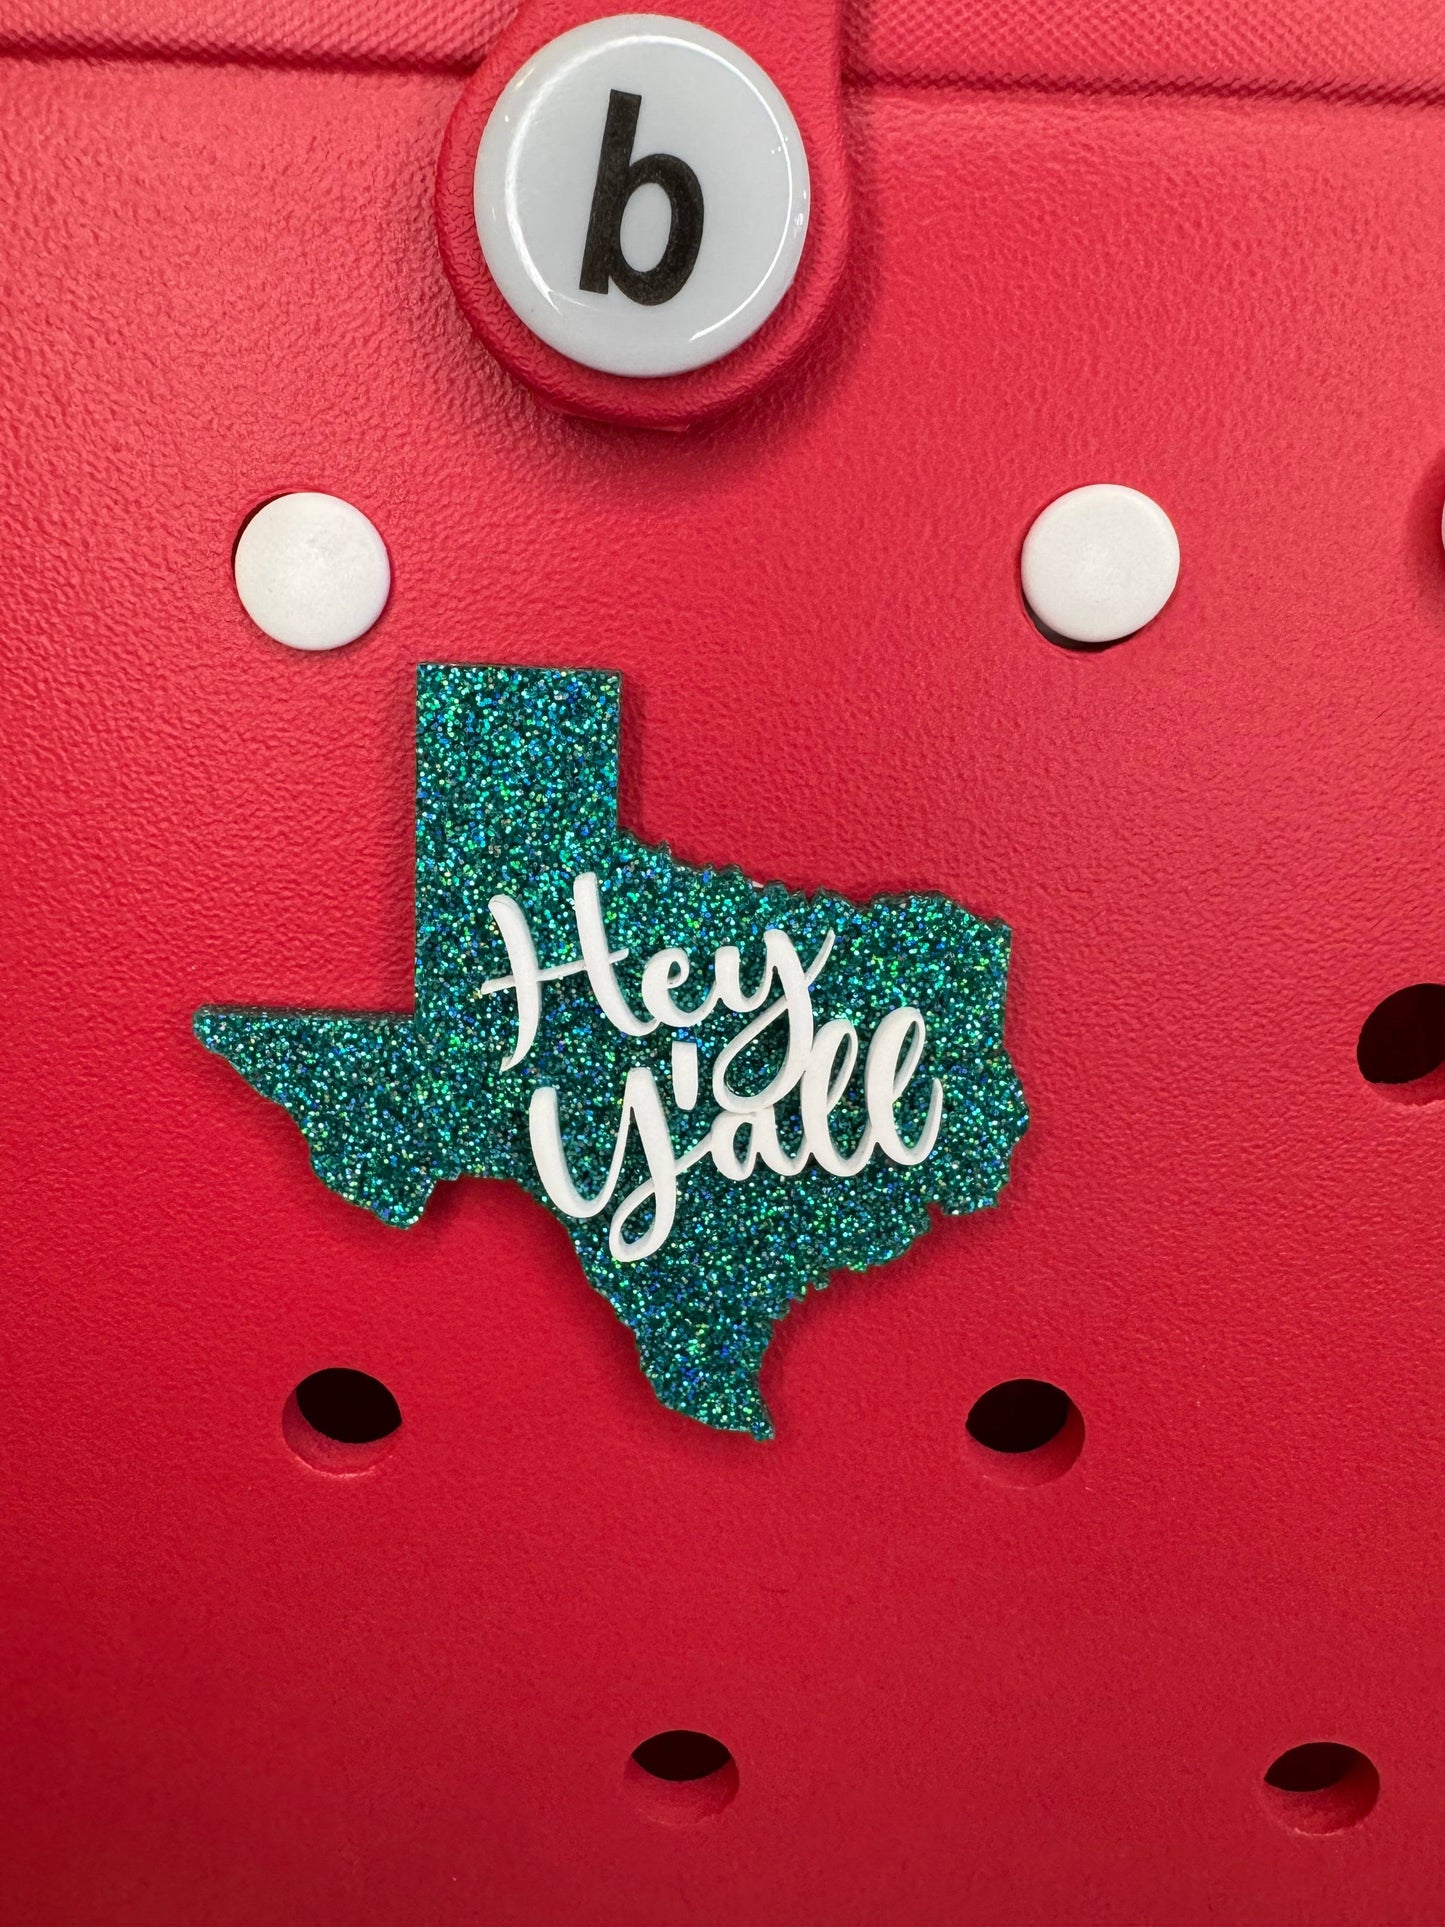 Hey Y'all Texas Charm for Bogg Style Bags - Southern Style Bag Accessory - Lone Star State Pride - Customizable Tote Charm - Unique Gift Idea